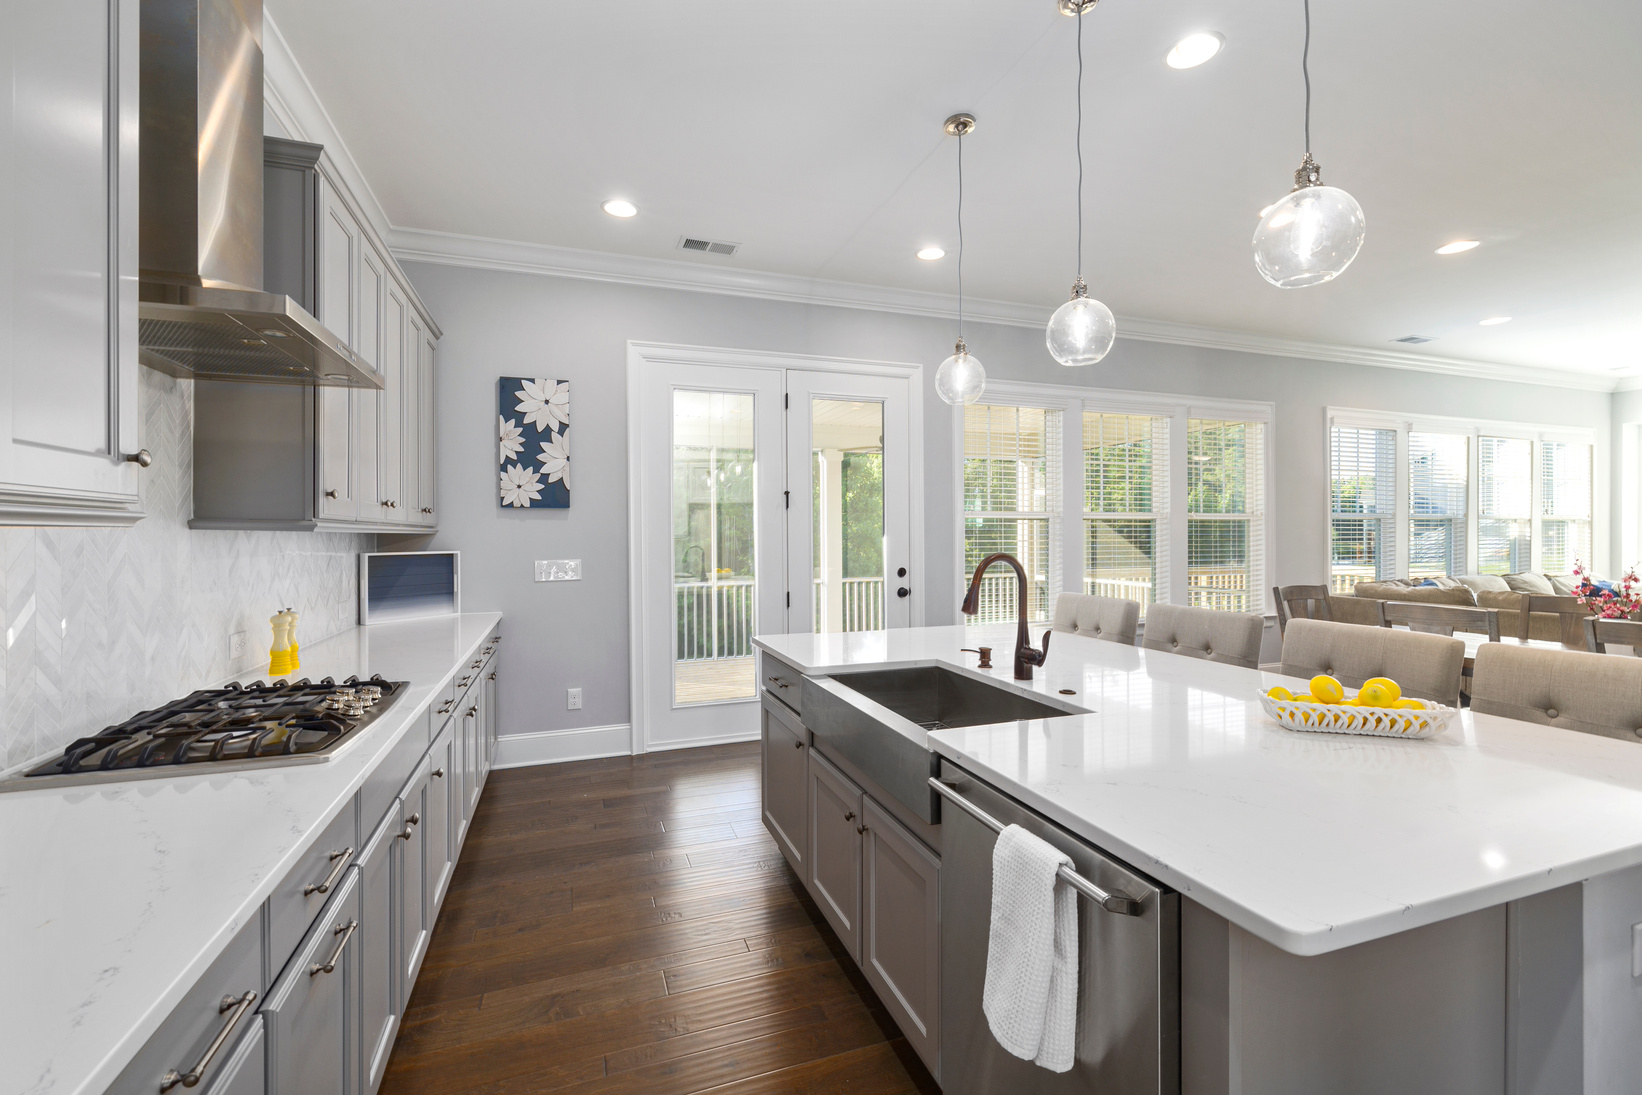 White Wooden Cabinets in the Kitchen